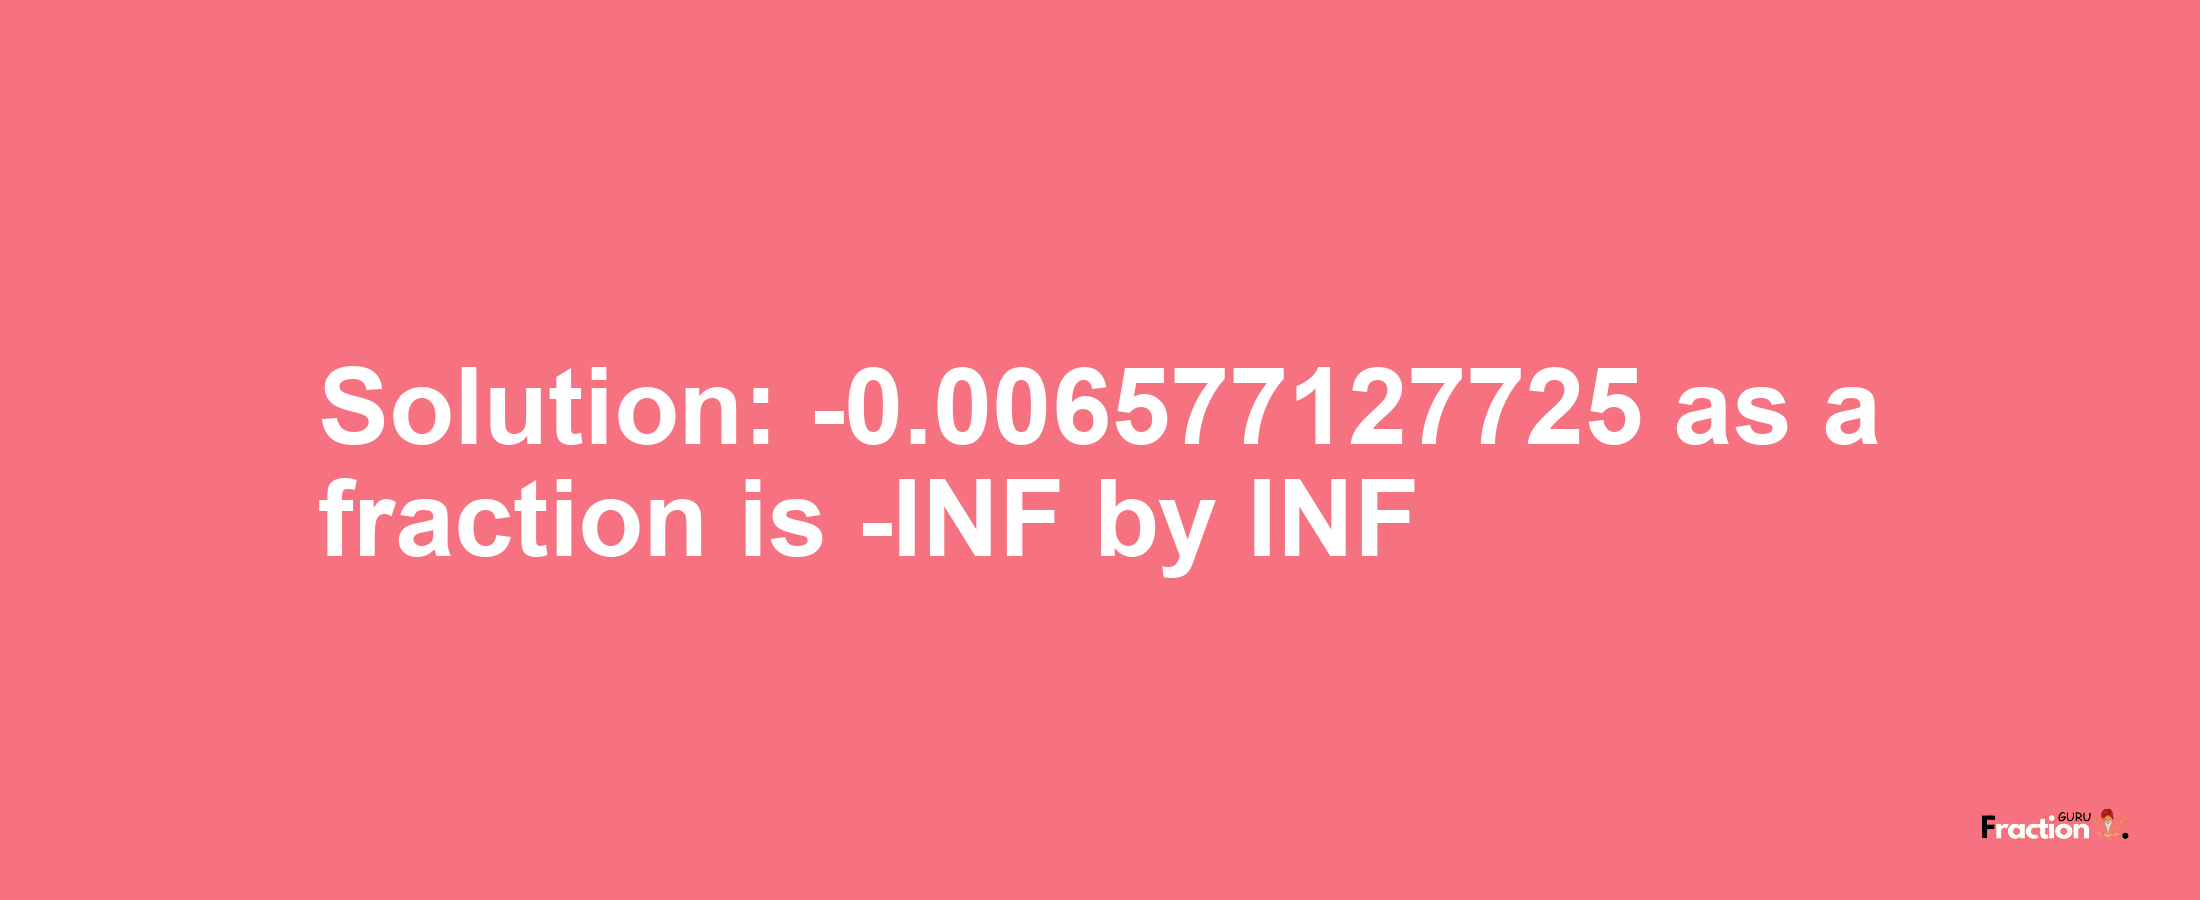 Solution:-0.006577127725 as a fraction is -INF/INF